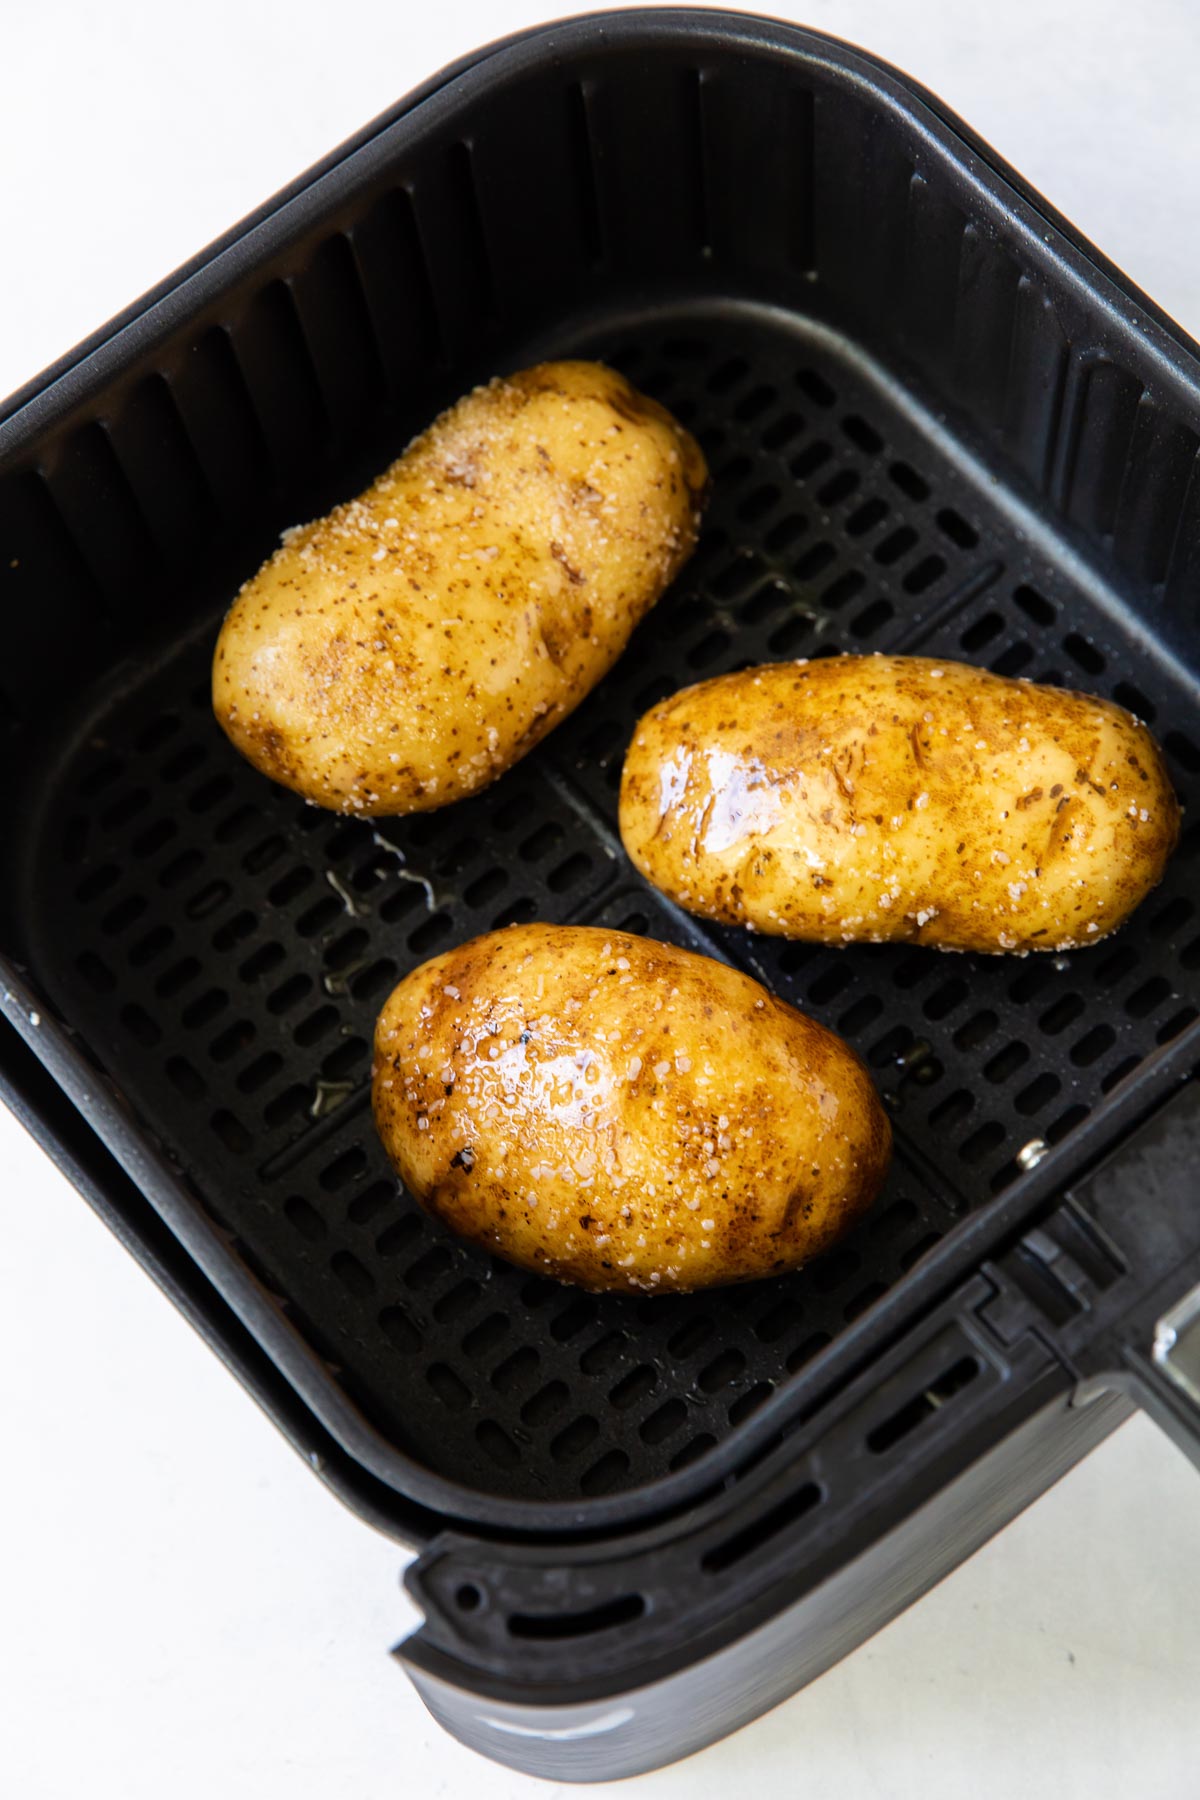 three russet potatoes rubbed with oil and salt in air fryer basket